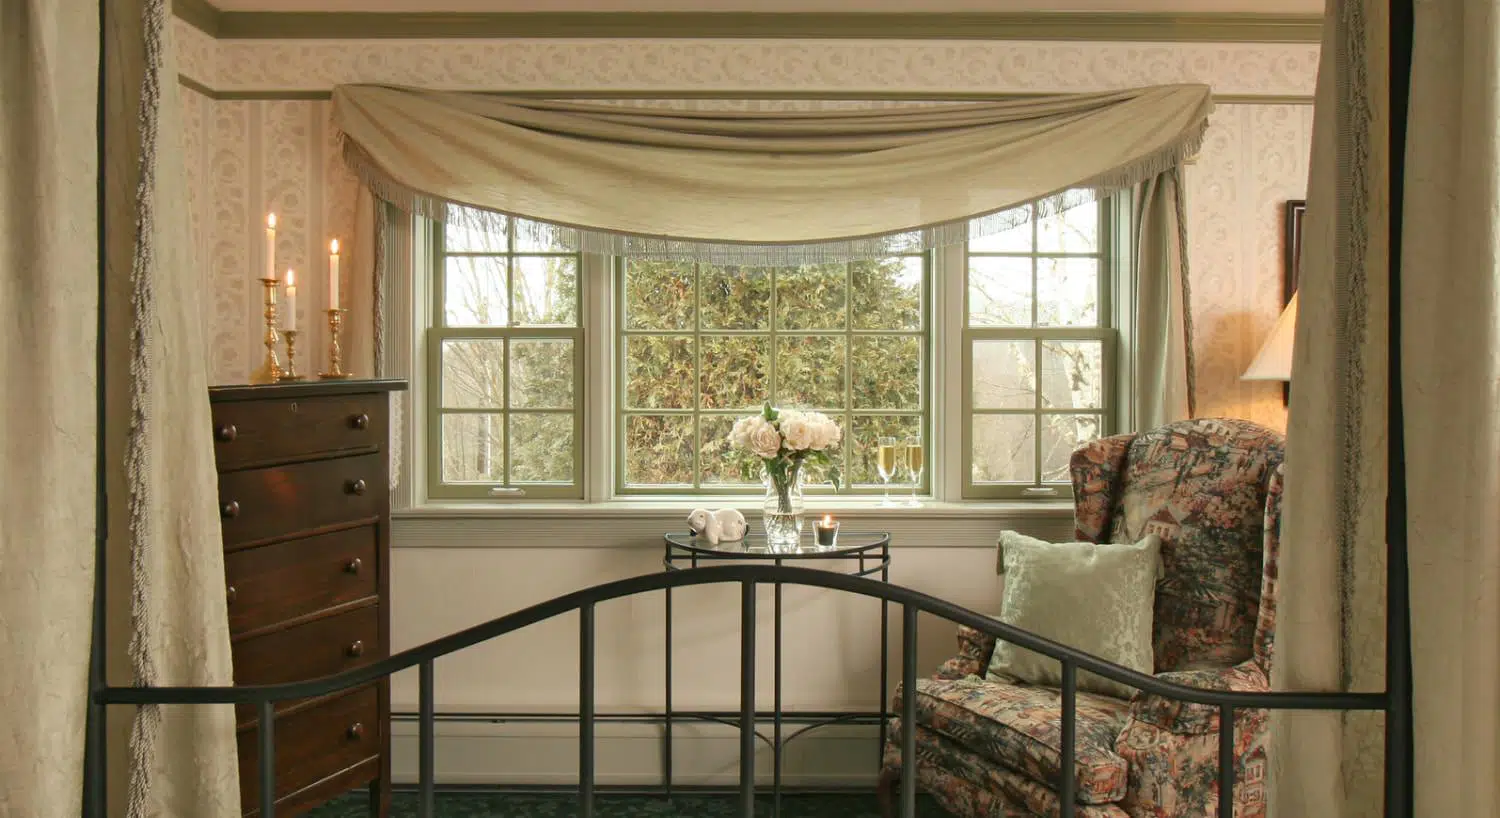 Sitting area with upholstered arm chair, wrought iron and glass table, dark wooden dresser, and view to the outside